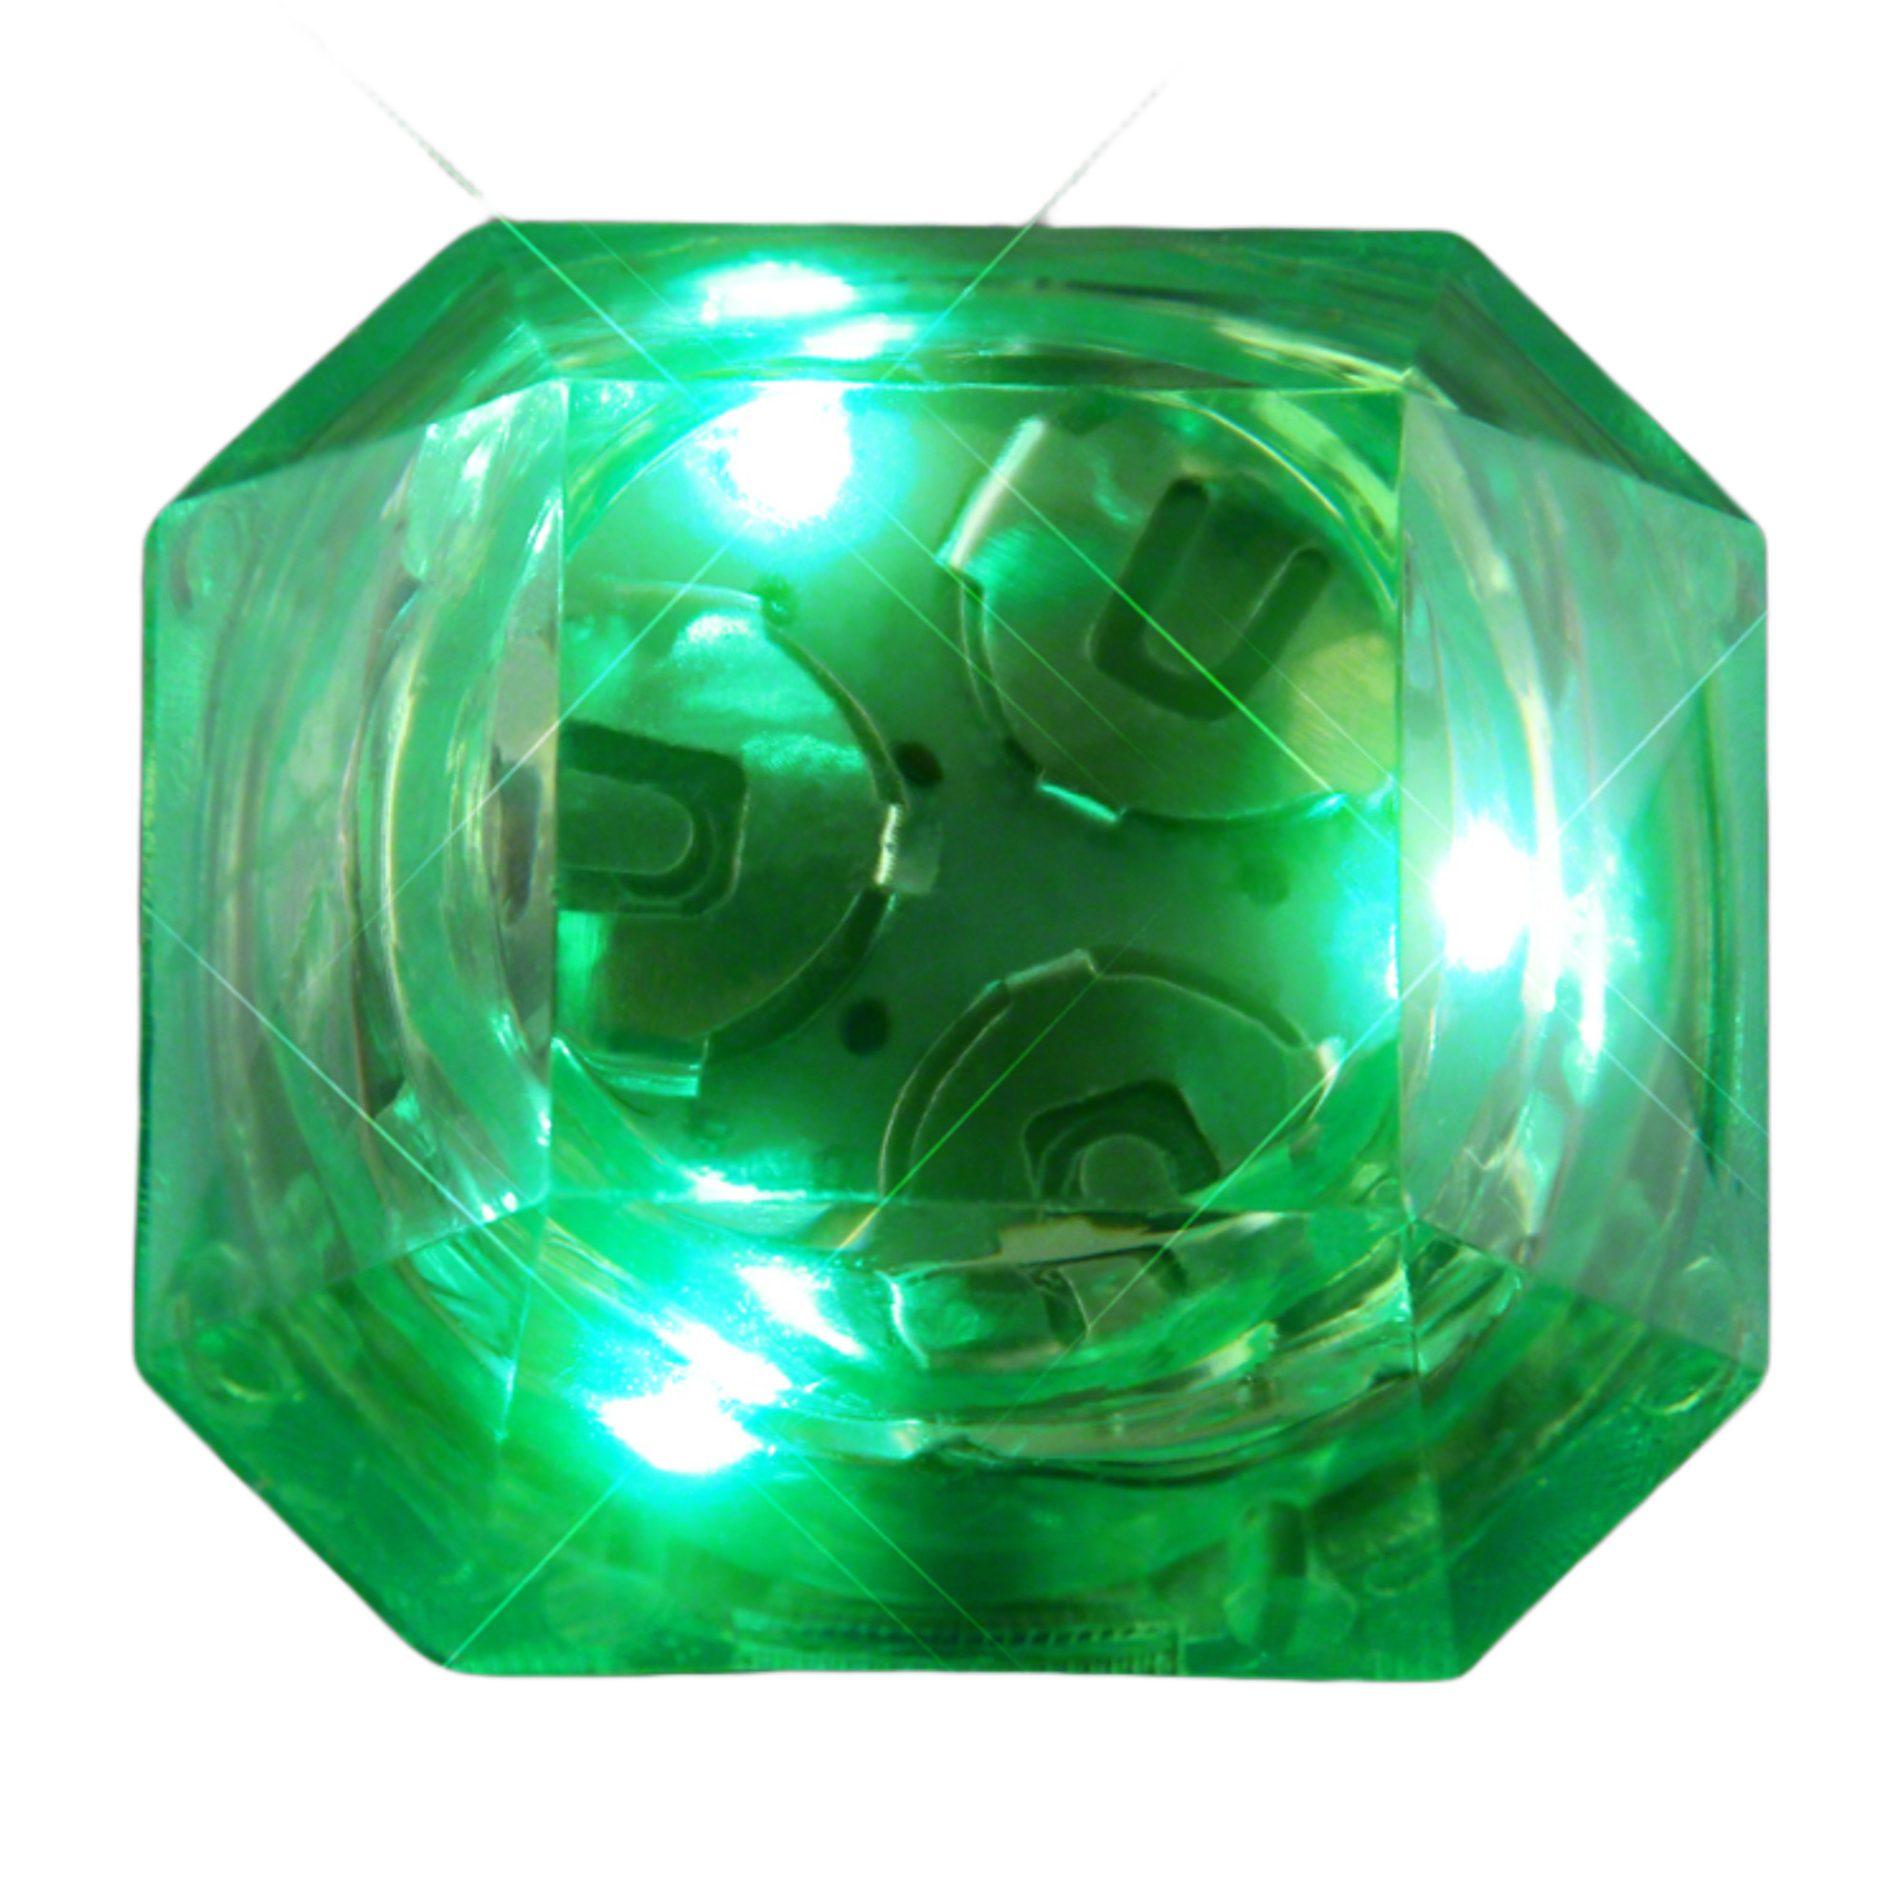 Huge Gem Flashing Rings Pack of 24 All Products 5